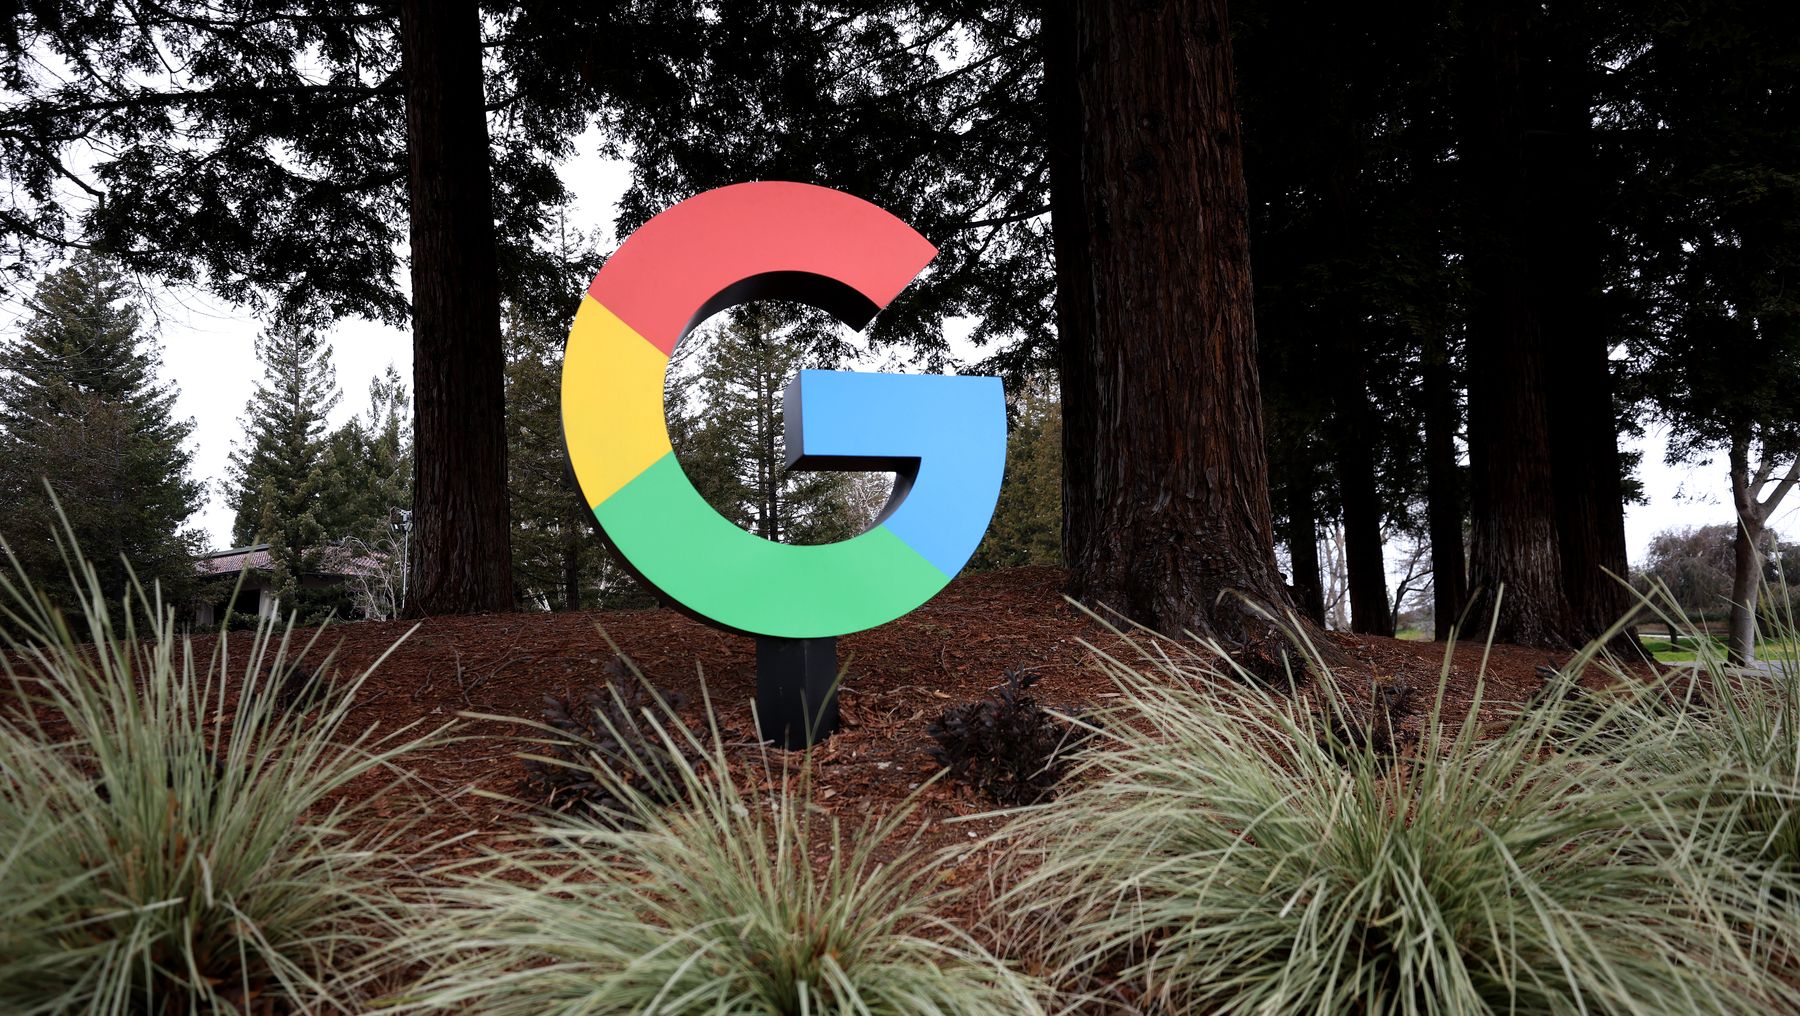 The Google logo is displayed at Google headquarters